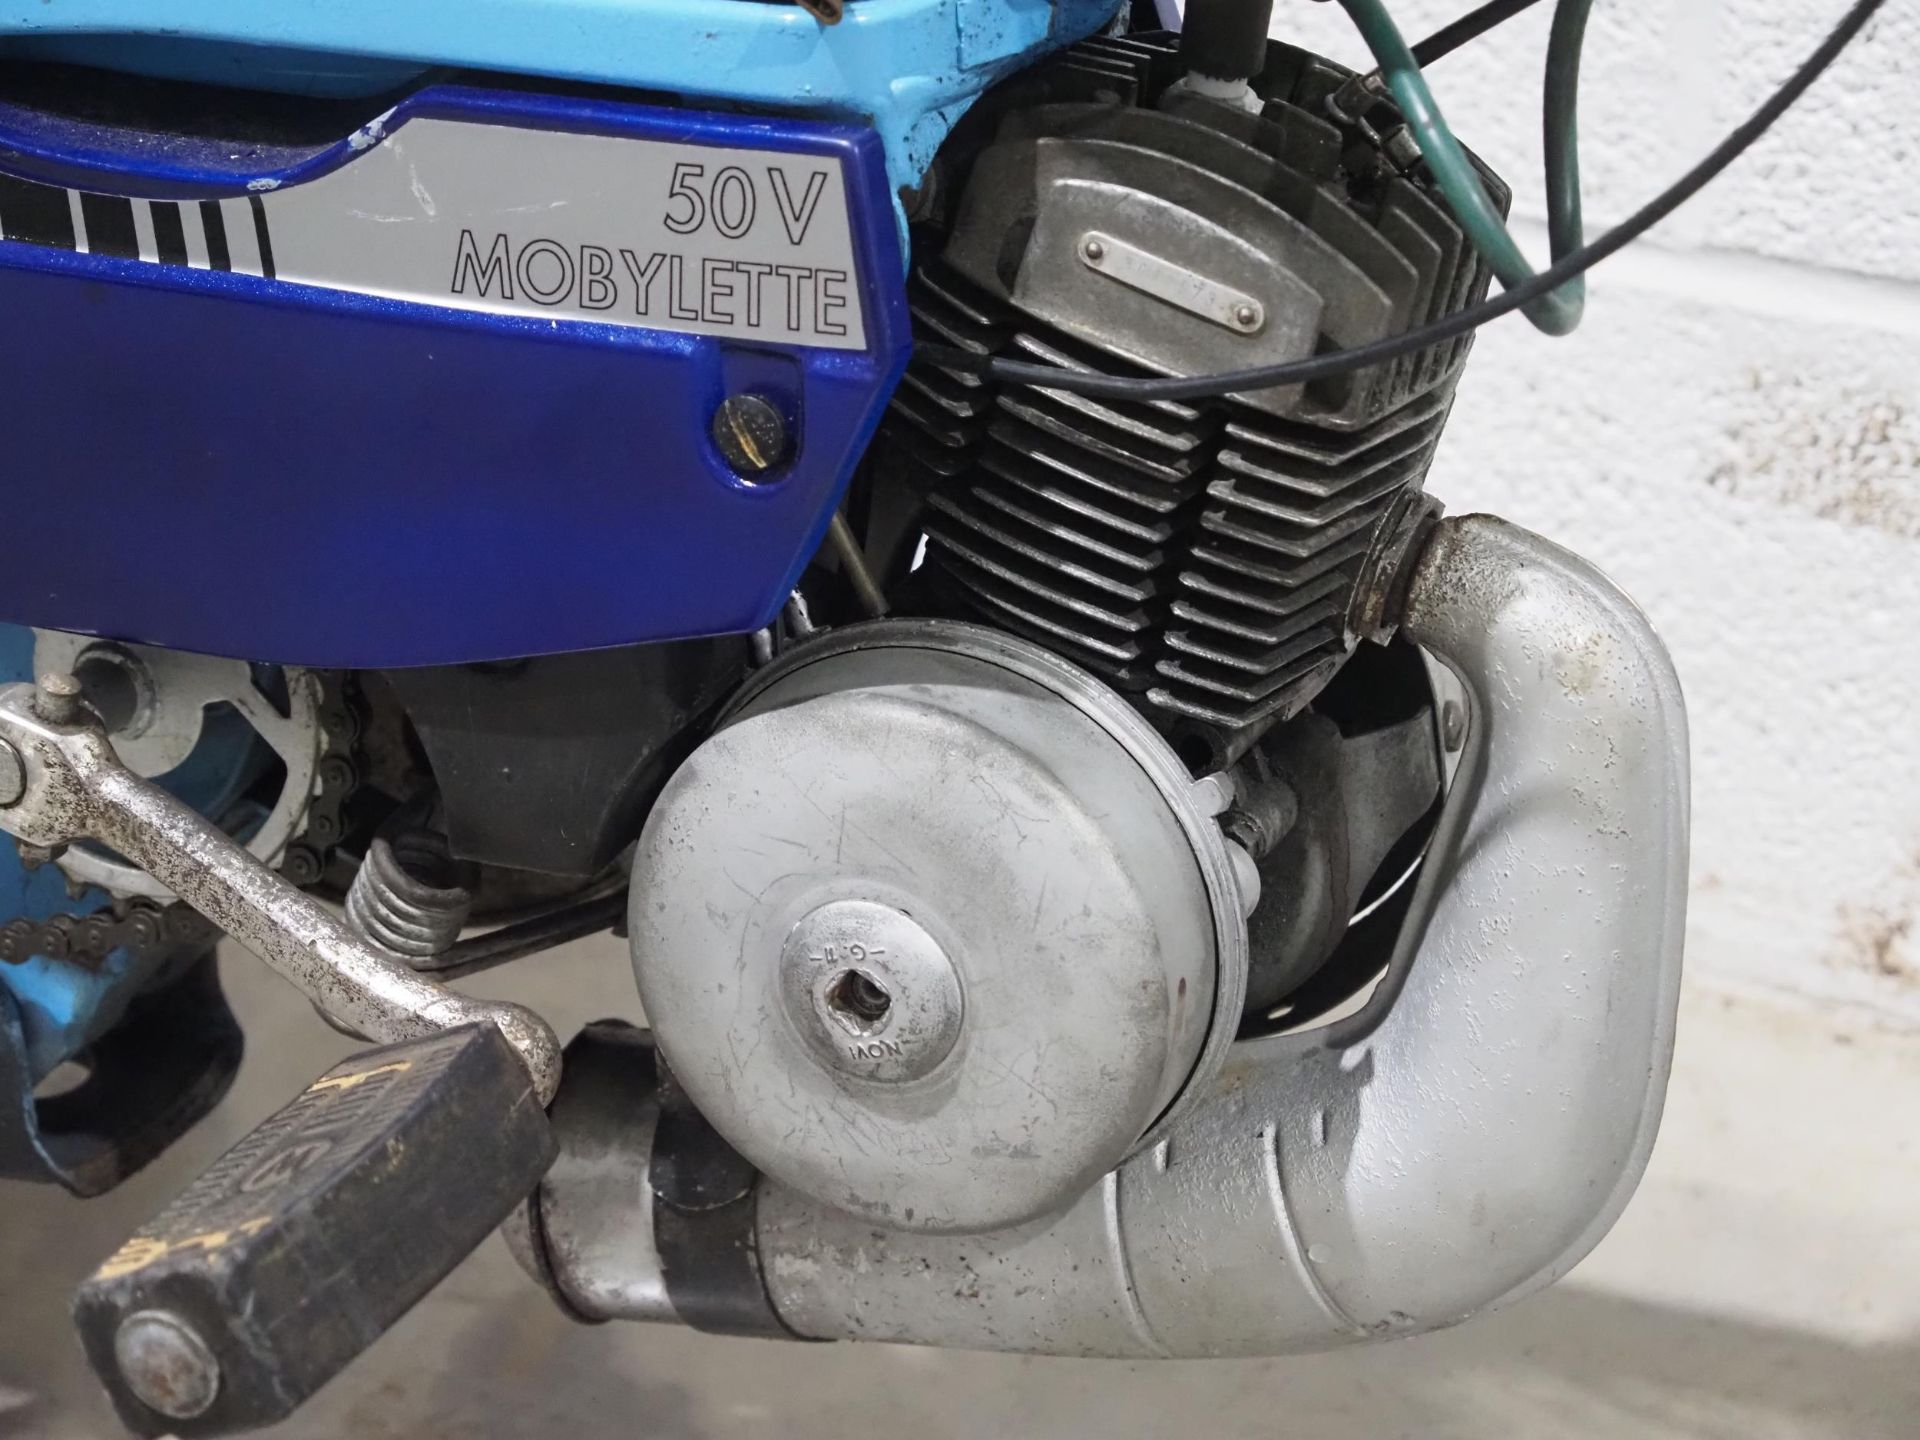 Motobecane 50V Mobylette moped. 1977. 49cc. Was running when stored some time ago and so will need - Bild 4 aus 6